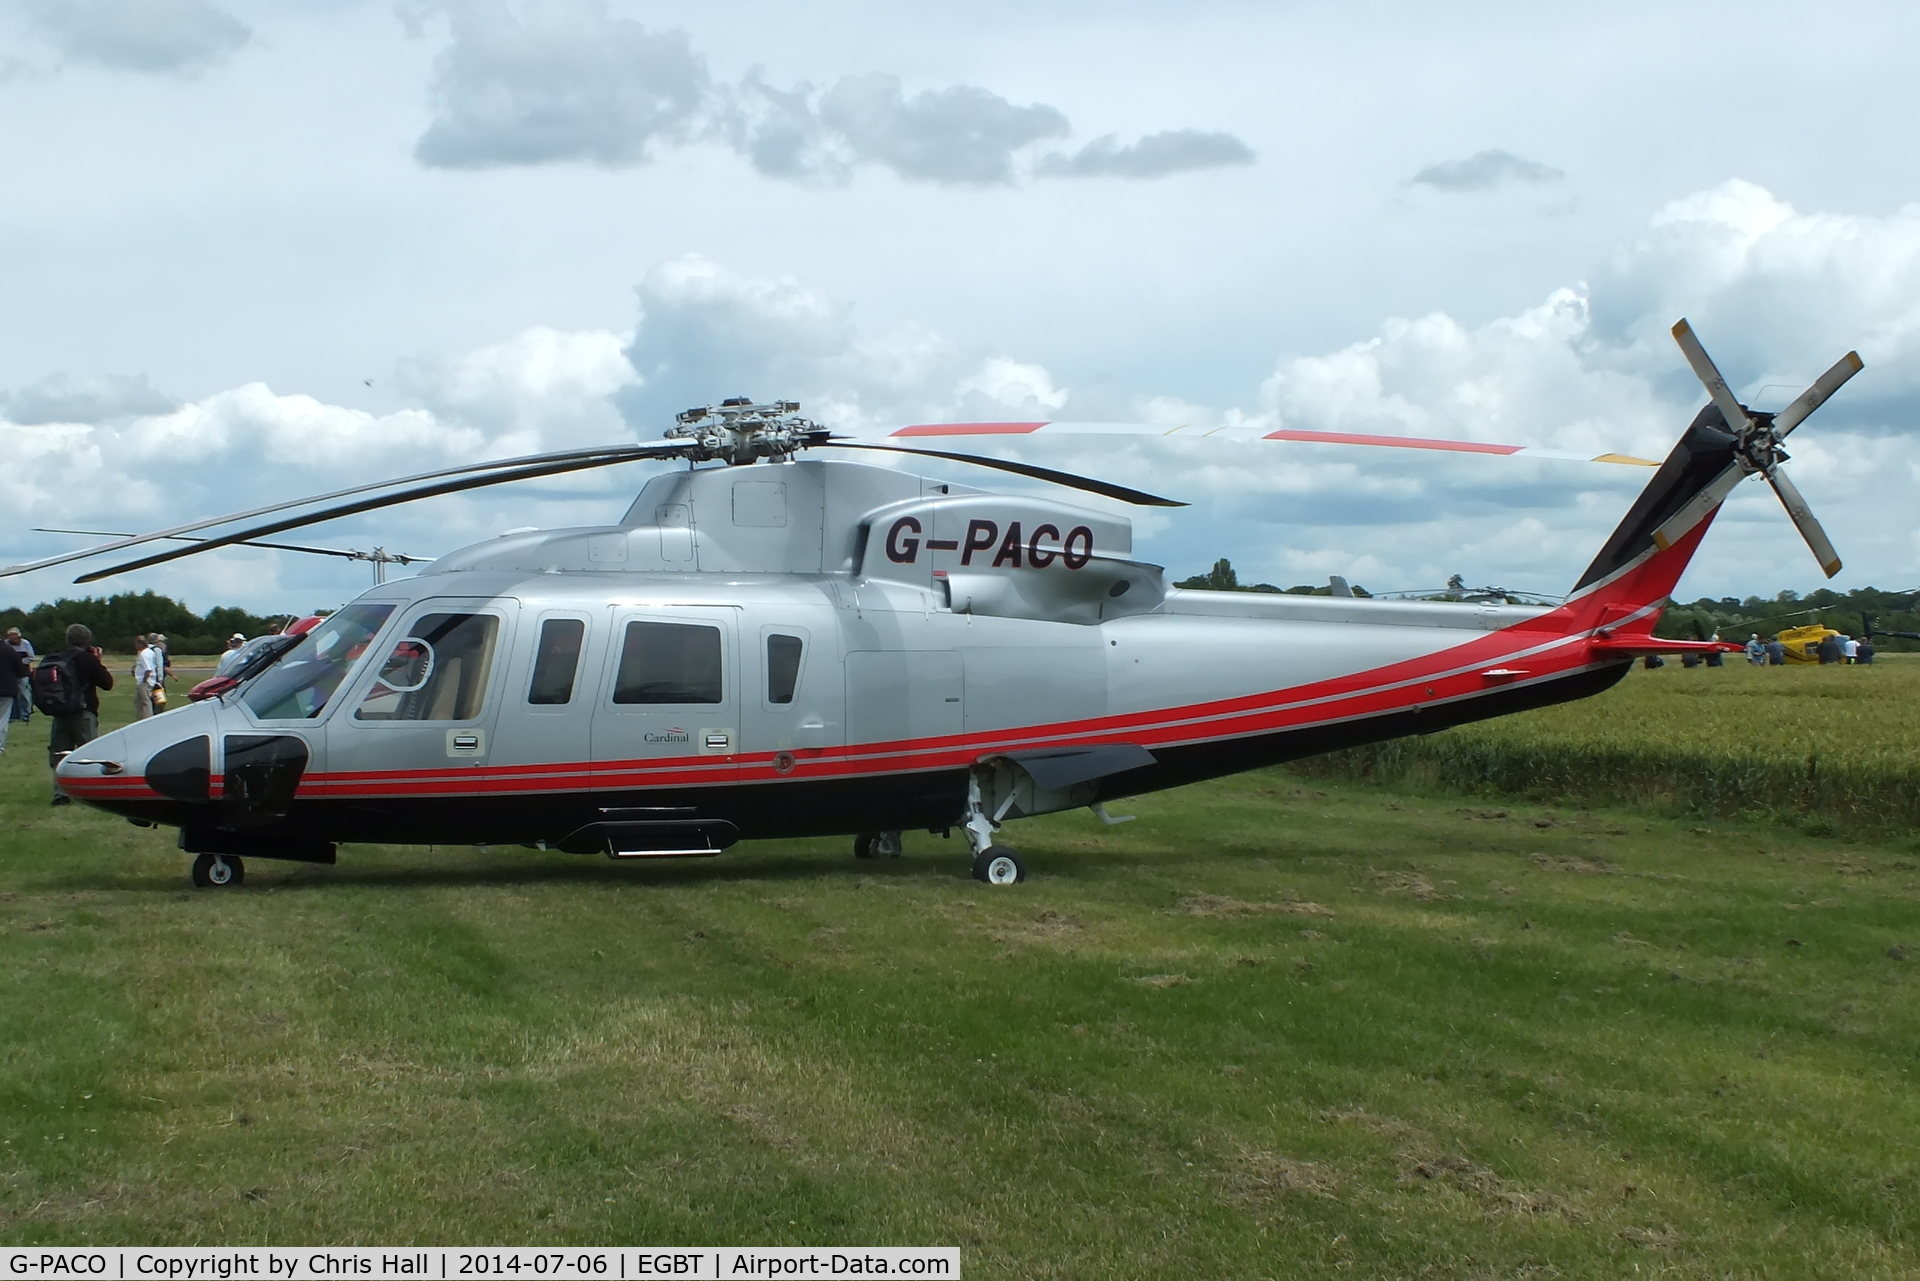 G-PACO, 2009 Sikorsky S-76C C/N 760782, ferrying race fans to the British F1 Grand Prix at Silverstone